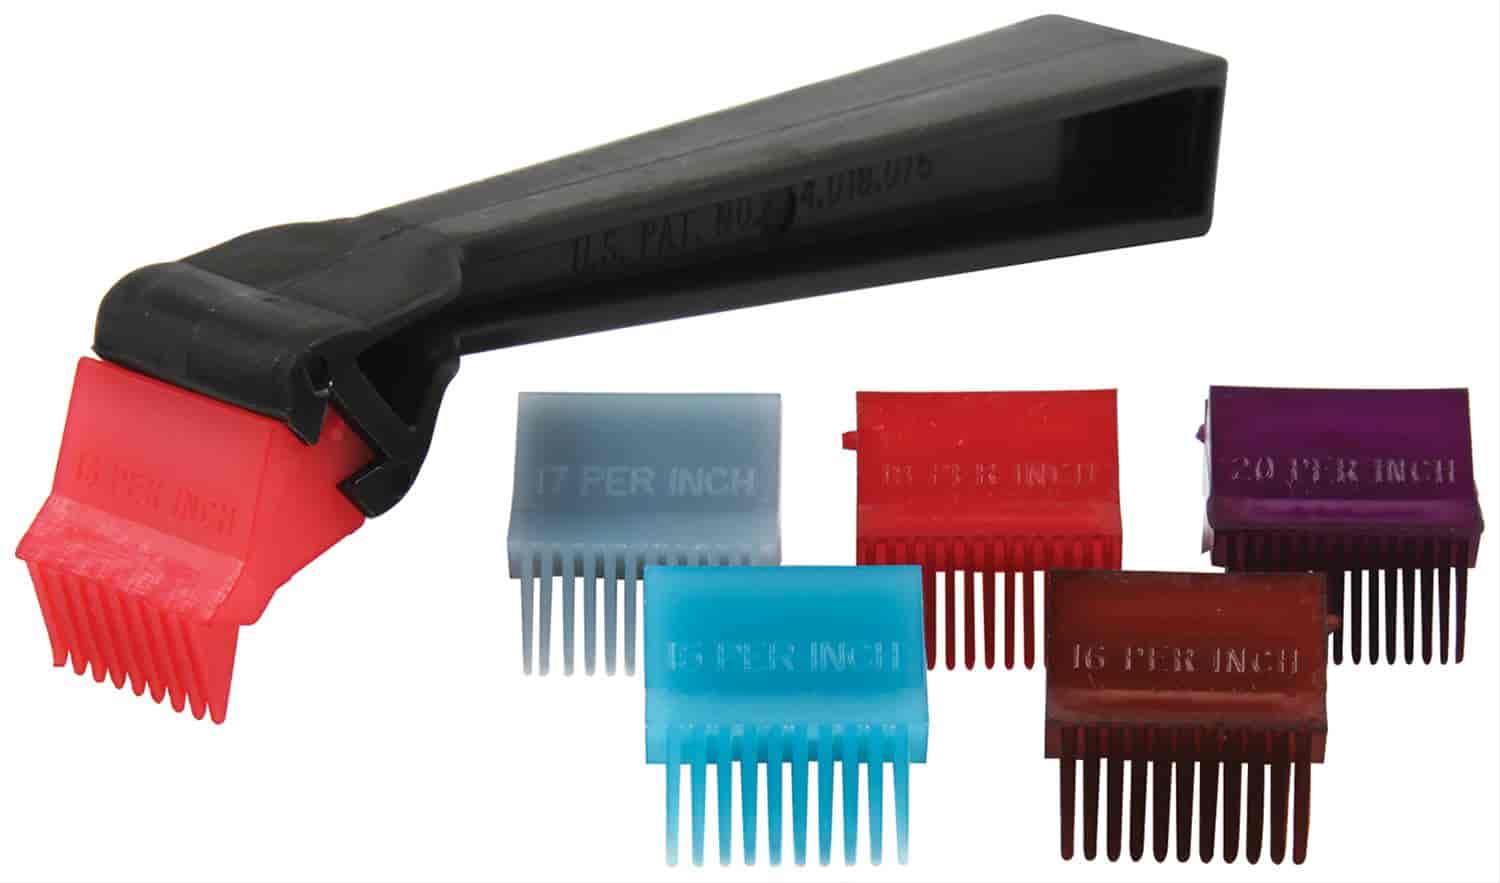 Radiator Fin Comb Kit Includes 6 Interchangeable Heads